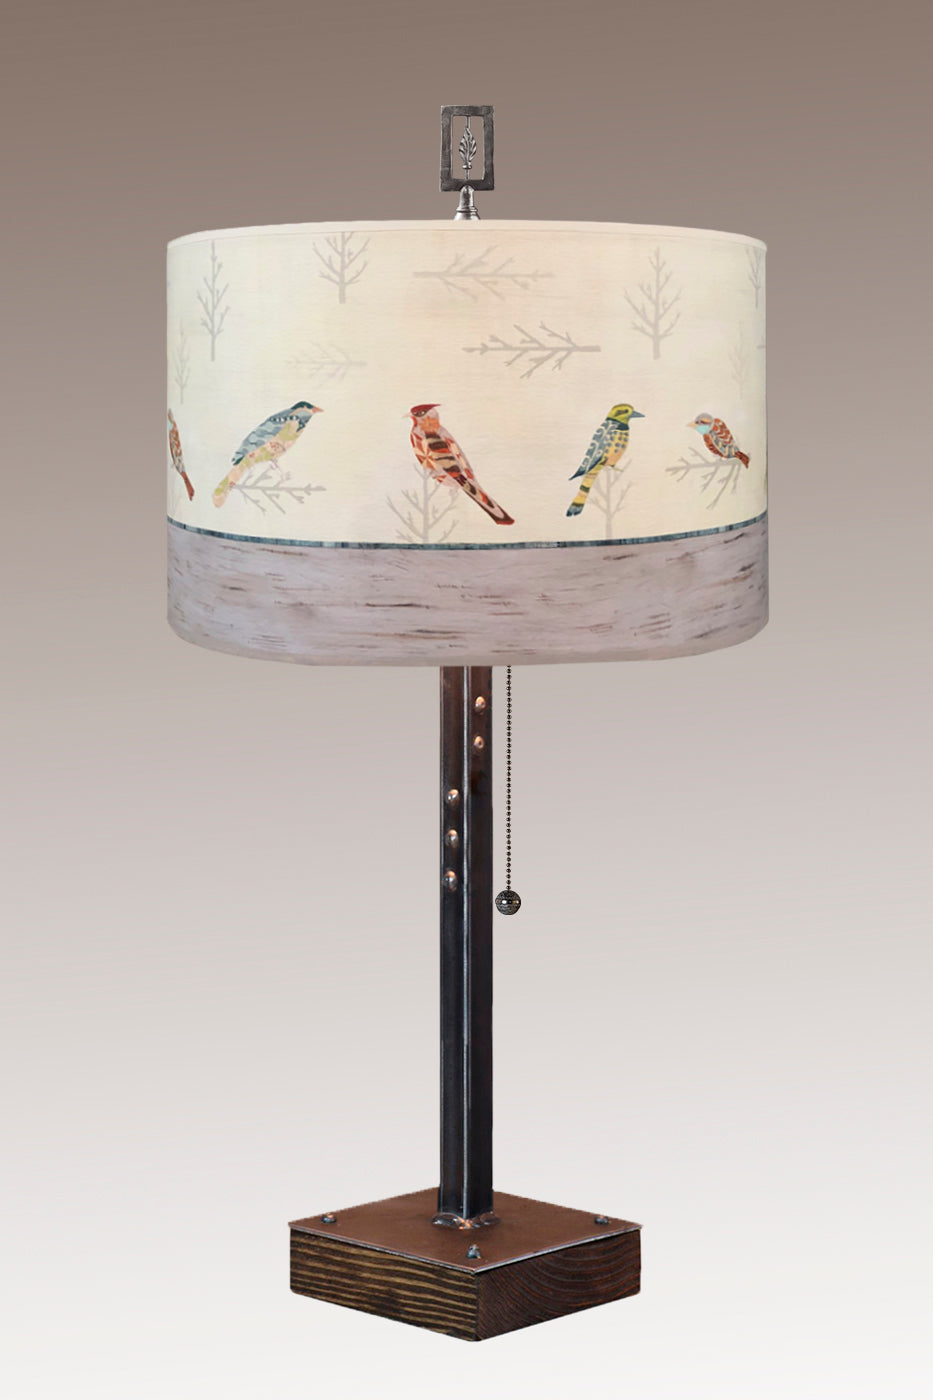 Steel Table Lamp on Wood with Large Drum Shade in Bird Friends